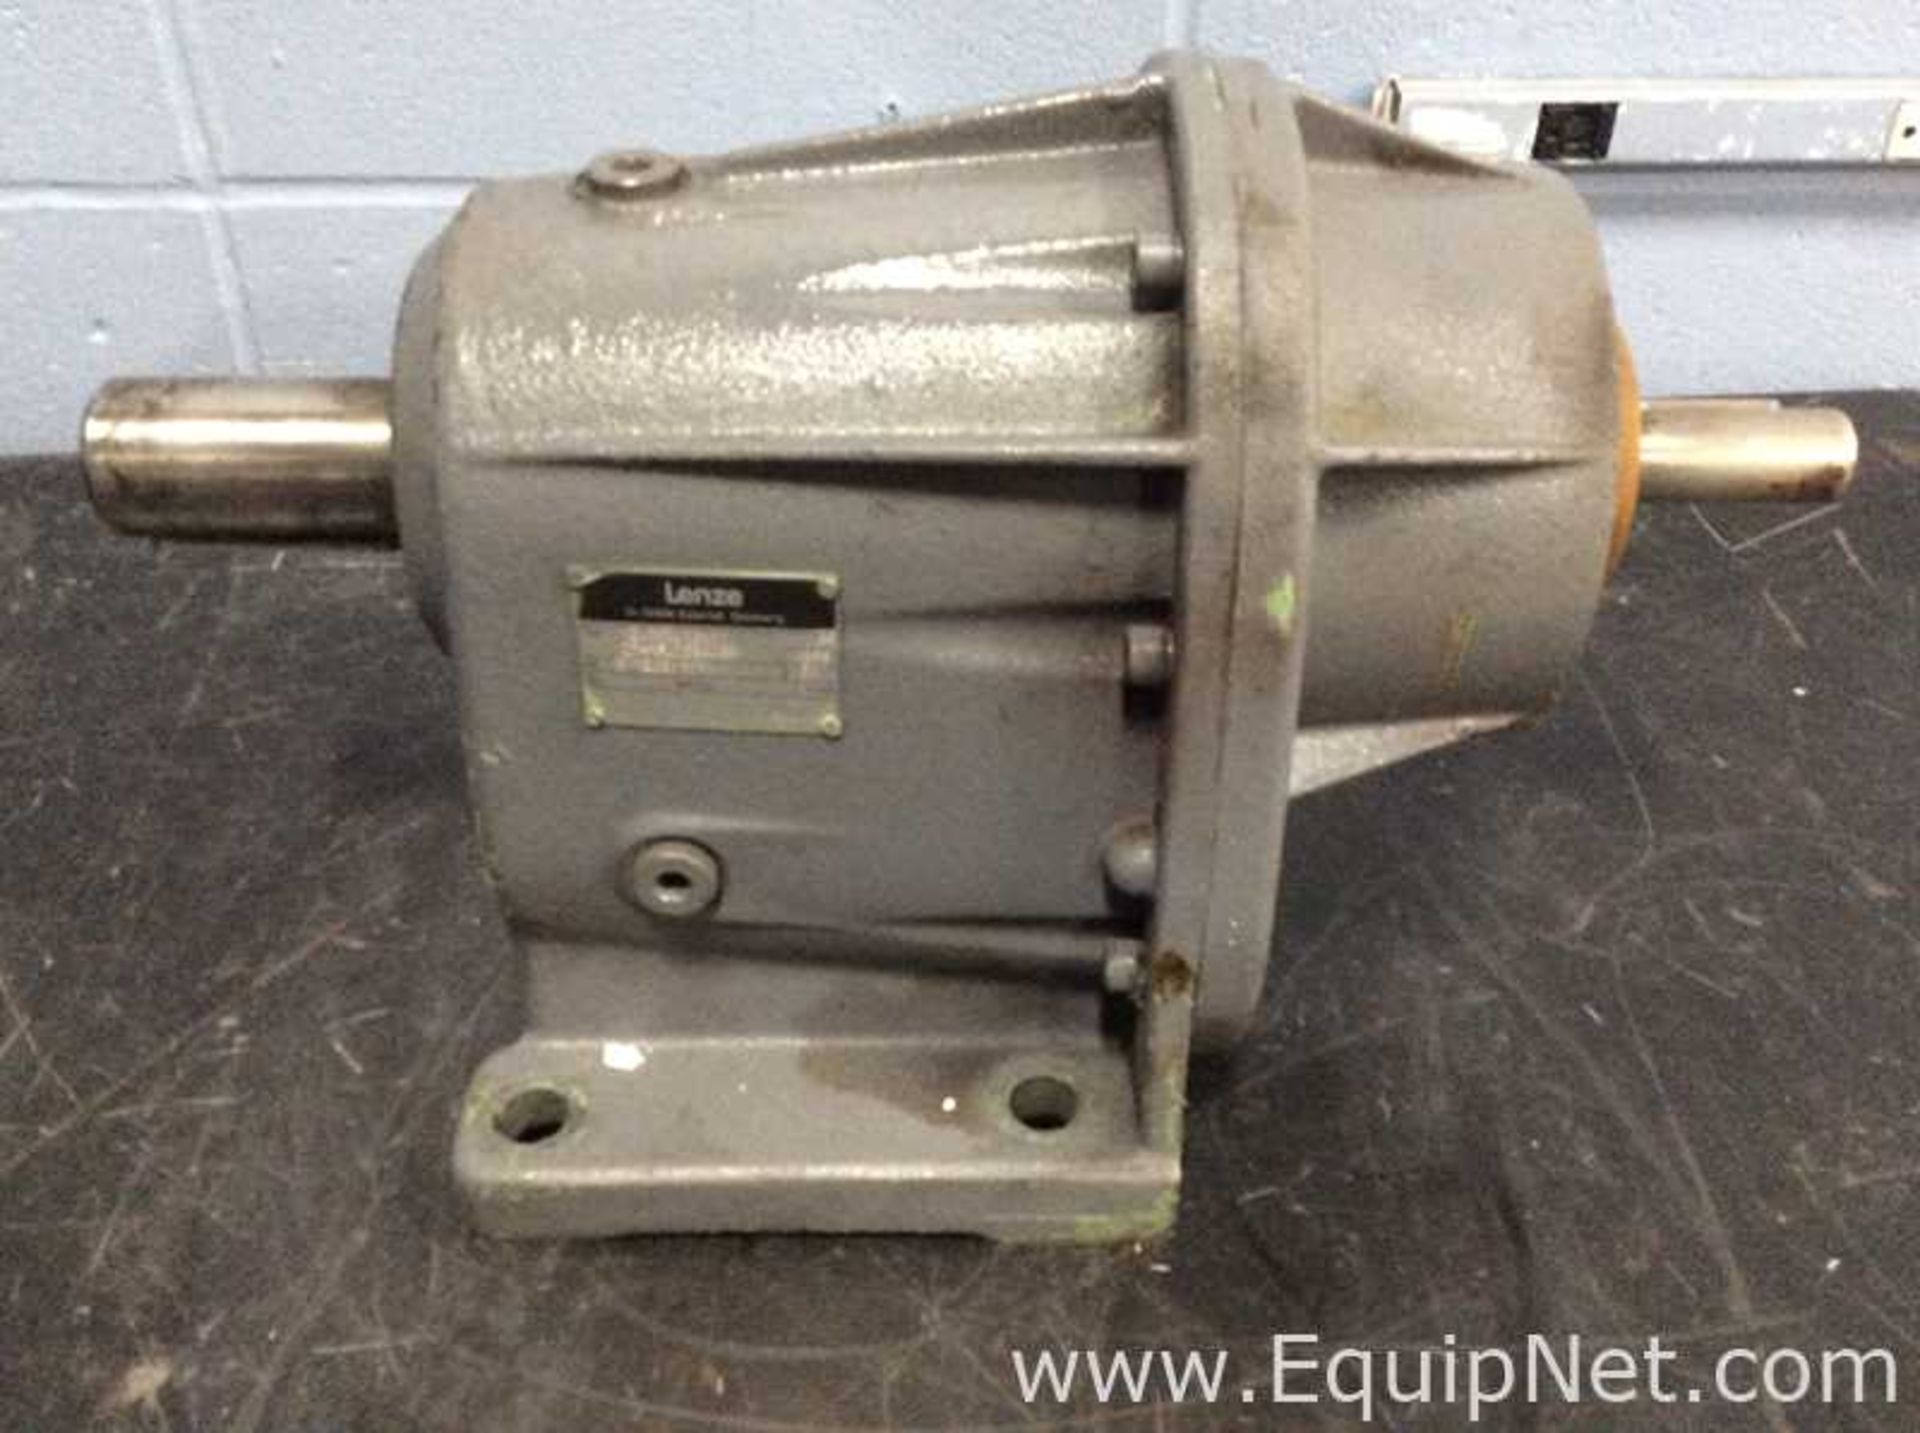 Lenze 12.206 electric Motor With Drive Box - Image 2 of 8